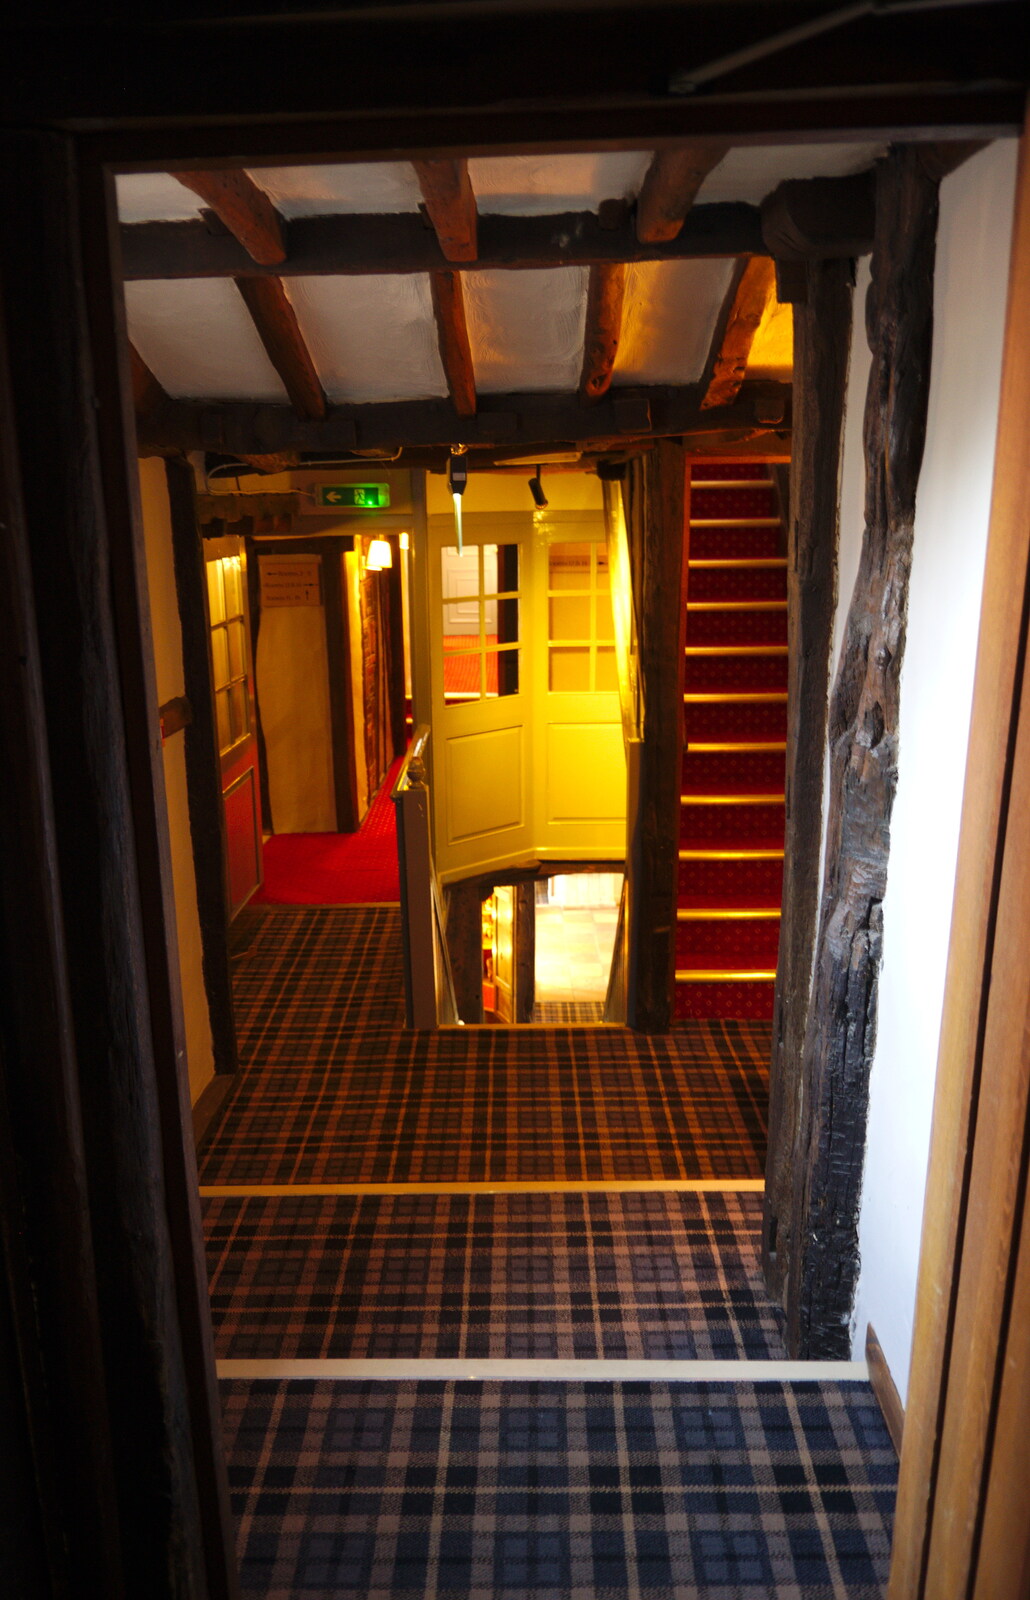 The random corridors of the hotel from The BSCC Bike Ride 2019, Coggeshall, Essex - 11th May 2019